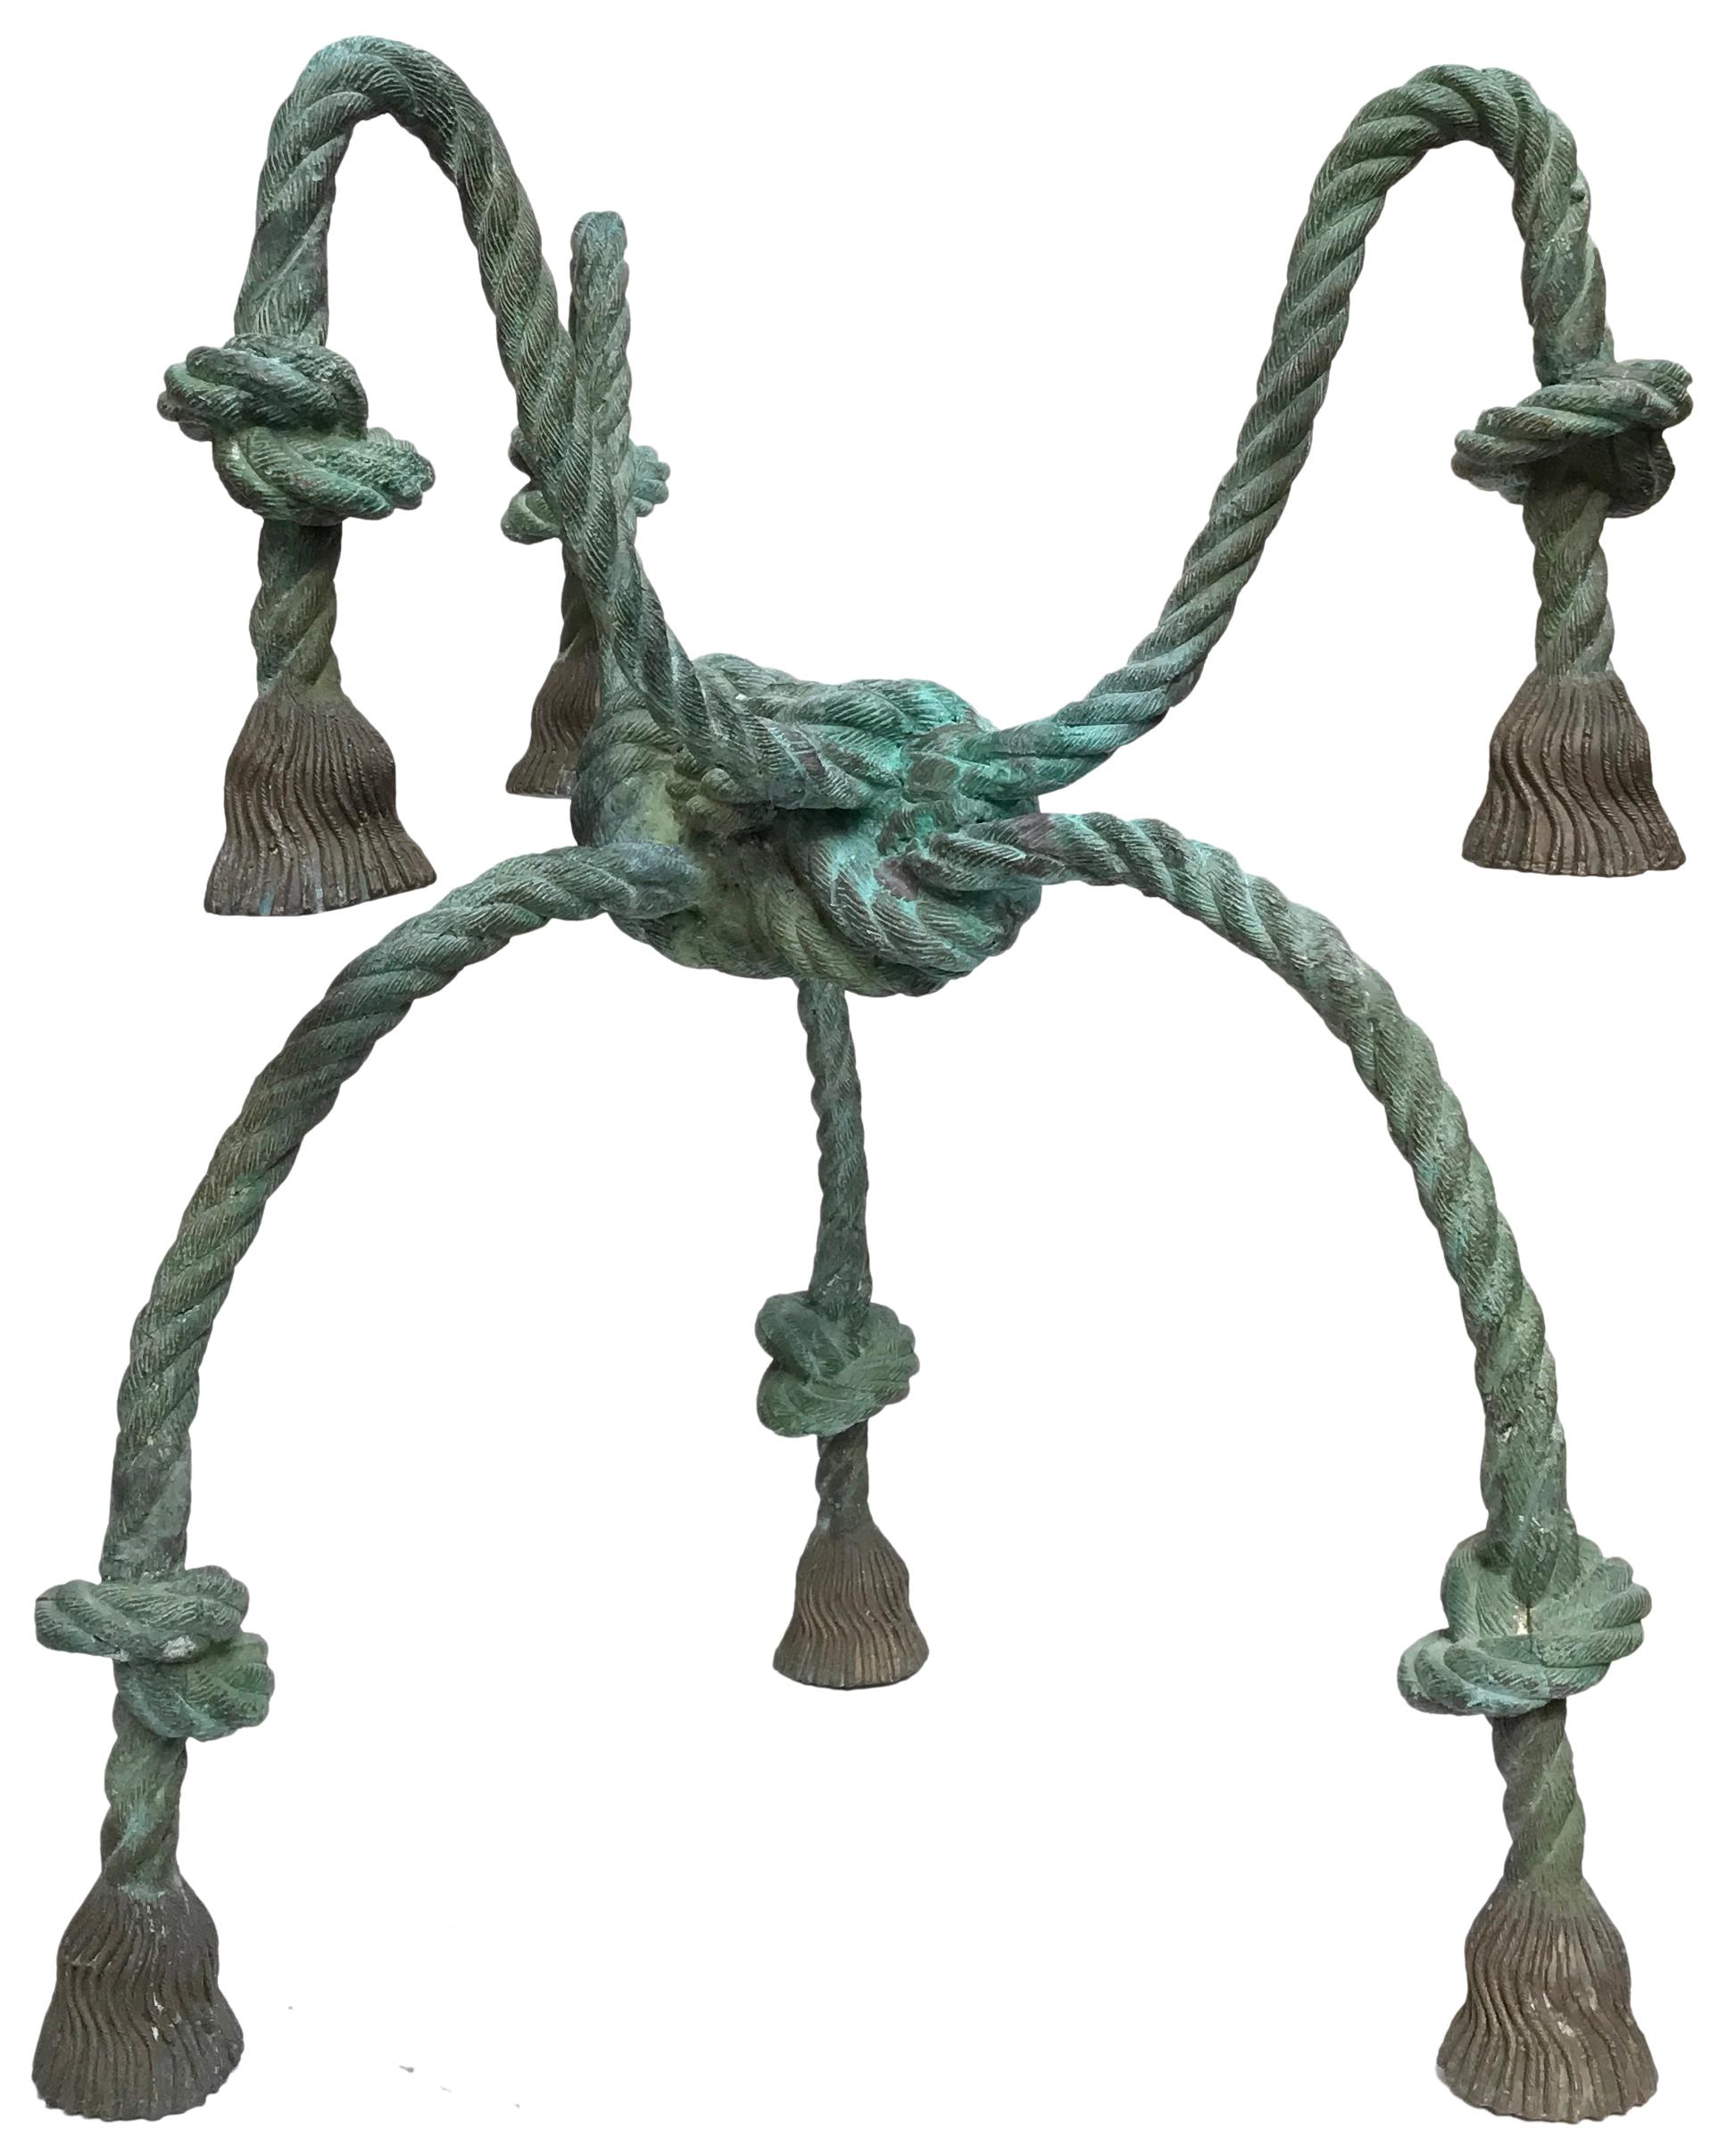 A wonderful, solid bronze trompe l'oeil rope with tassels, table base. Fantastic quality casting and details as well as a rich and warm, applied green patina. A beautifully executed, surrealist, nautical inspired concept with an elegant and alluring